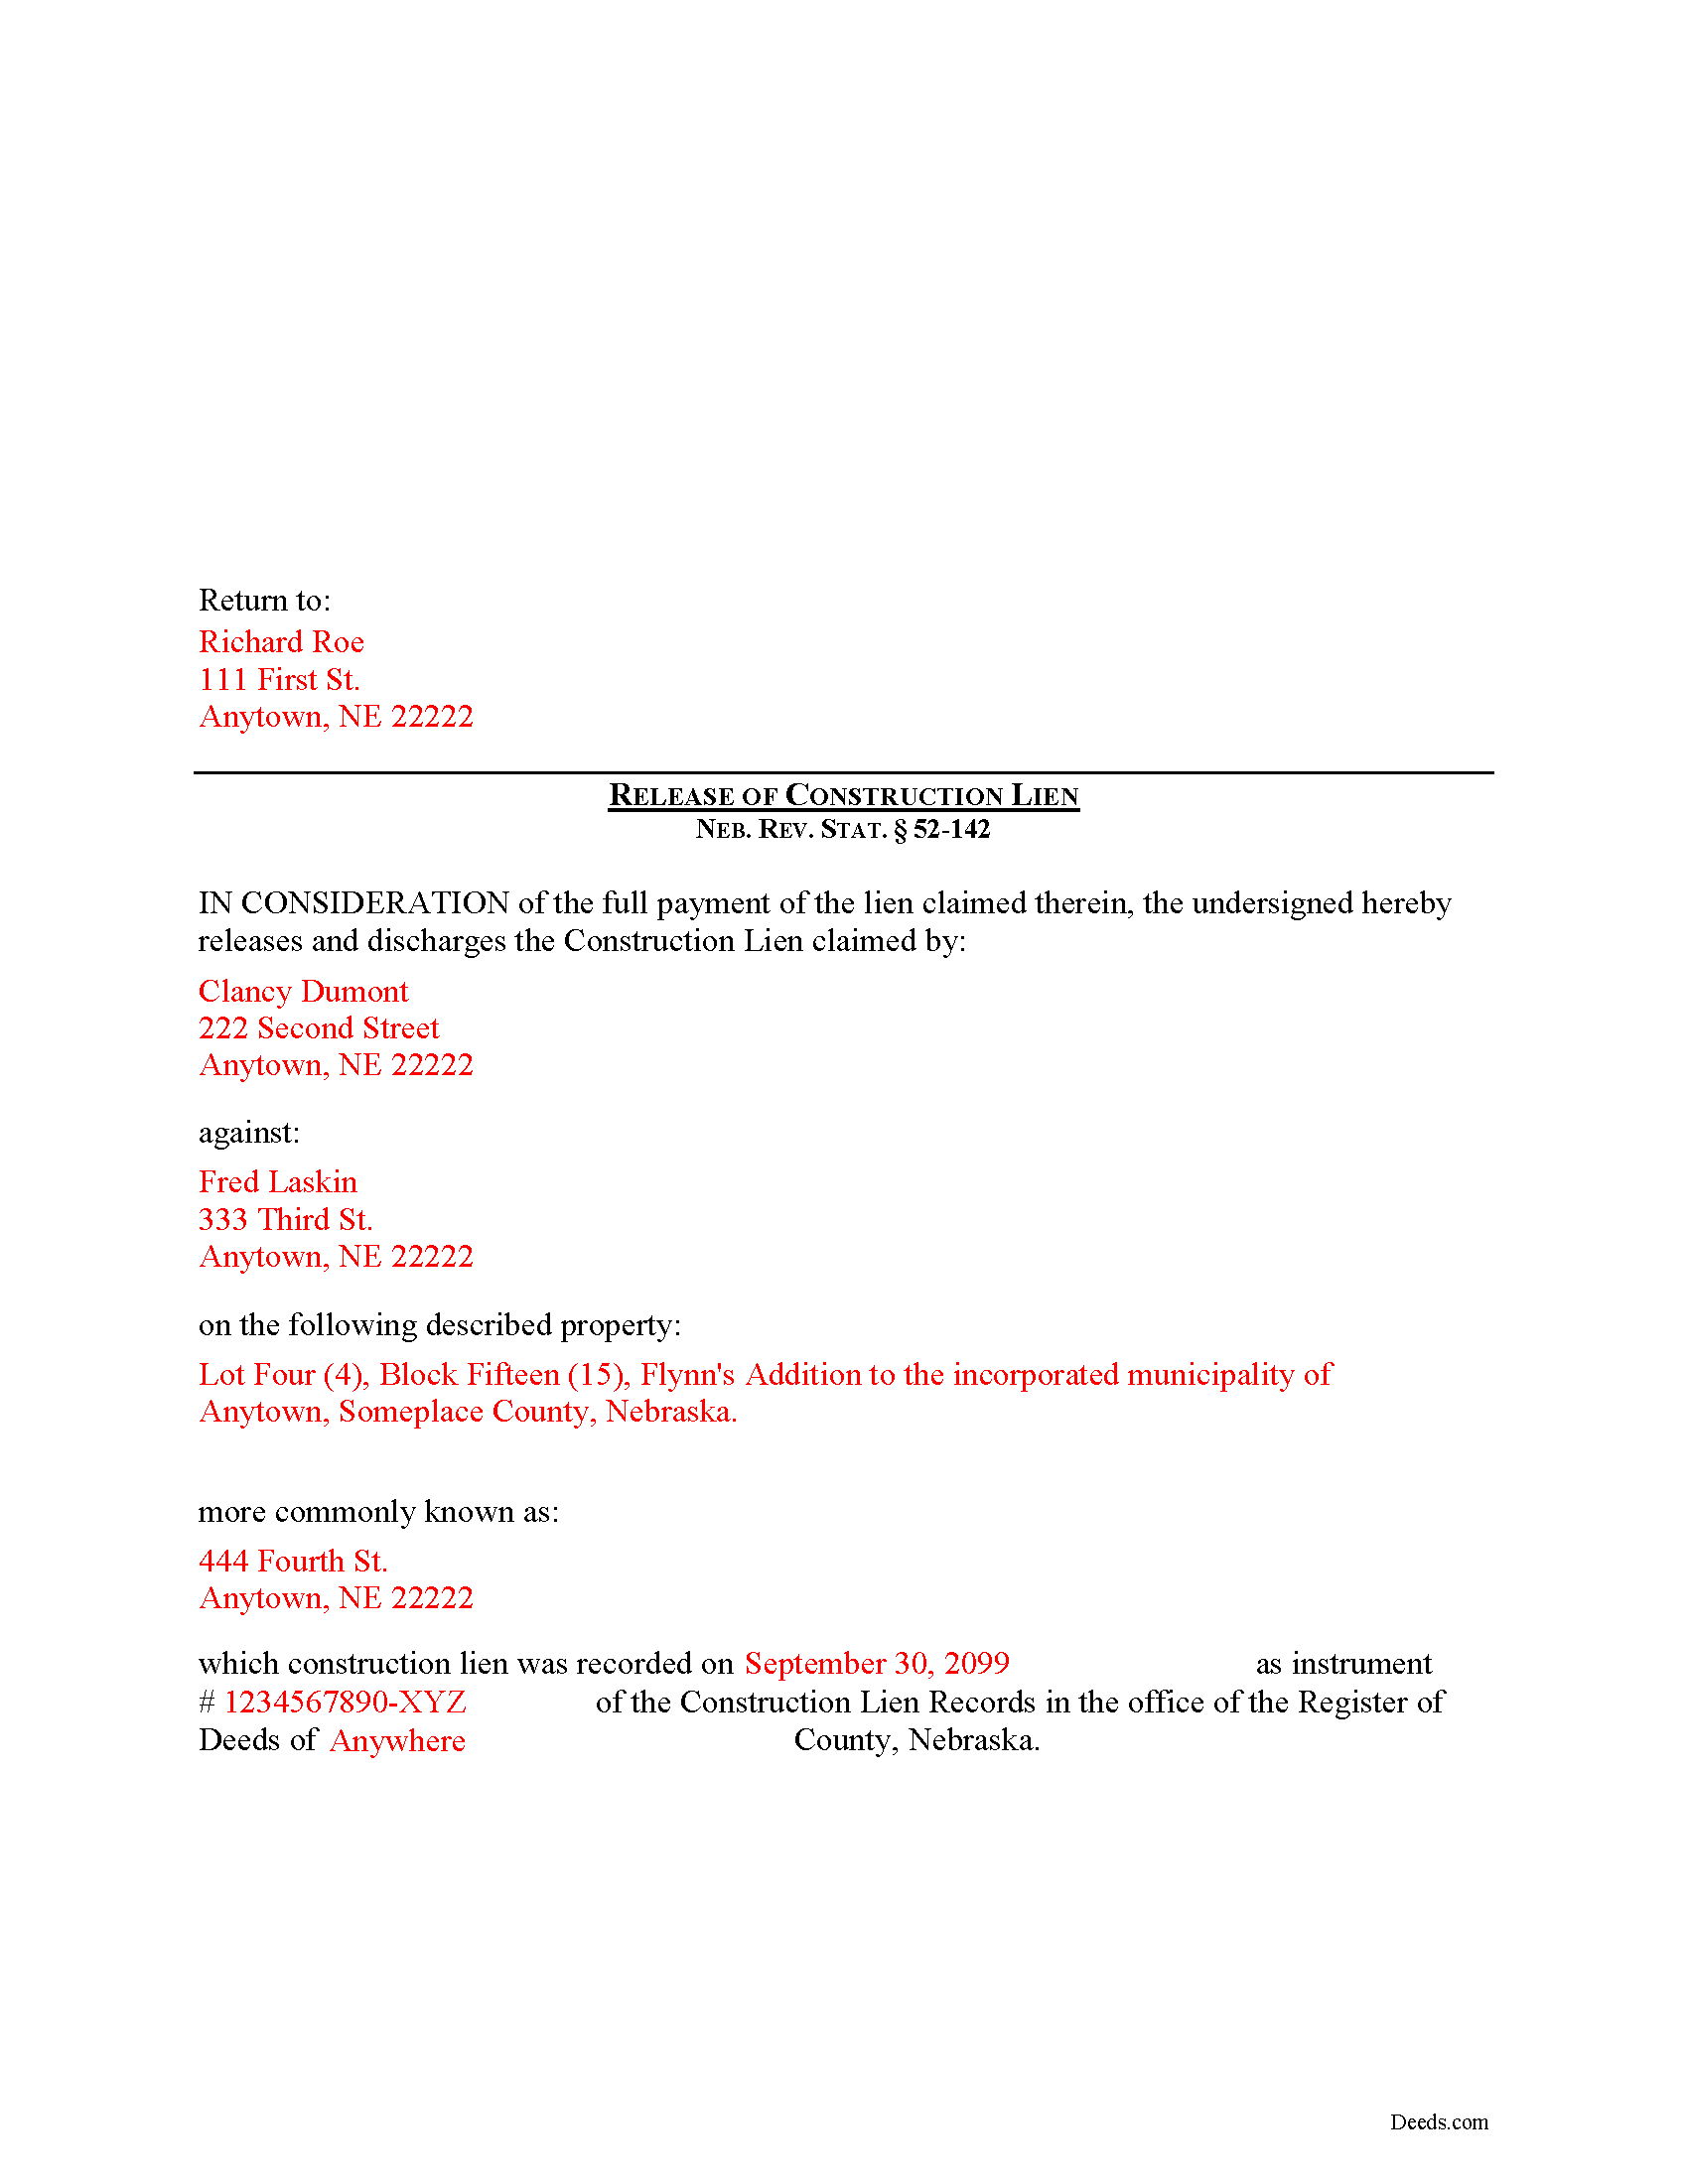 Completed Example of the Construction Lien Release Document